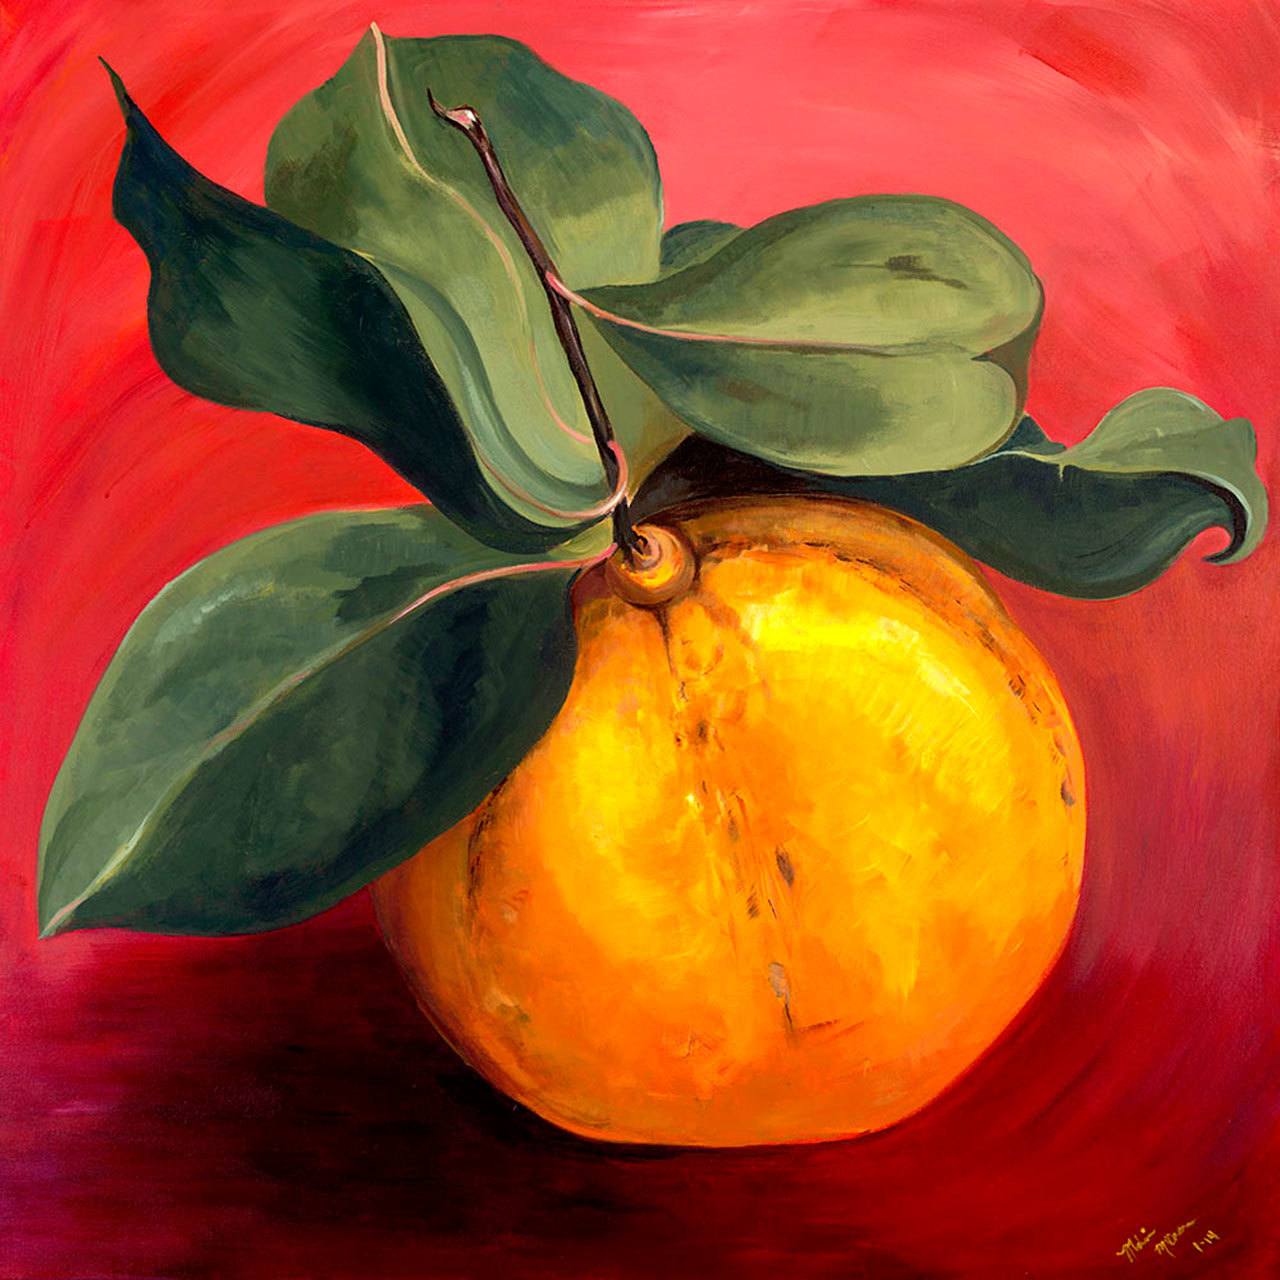 This piece by Melissa McCanna, titled “Quince,” will be on display this weekend during the Art Port Townsend 18th Annual Artist Studio Tour. — Kim Simonelli.